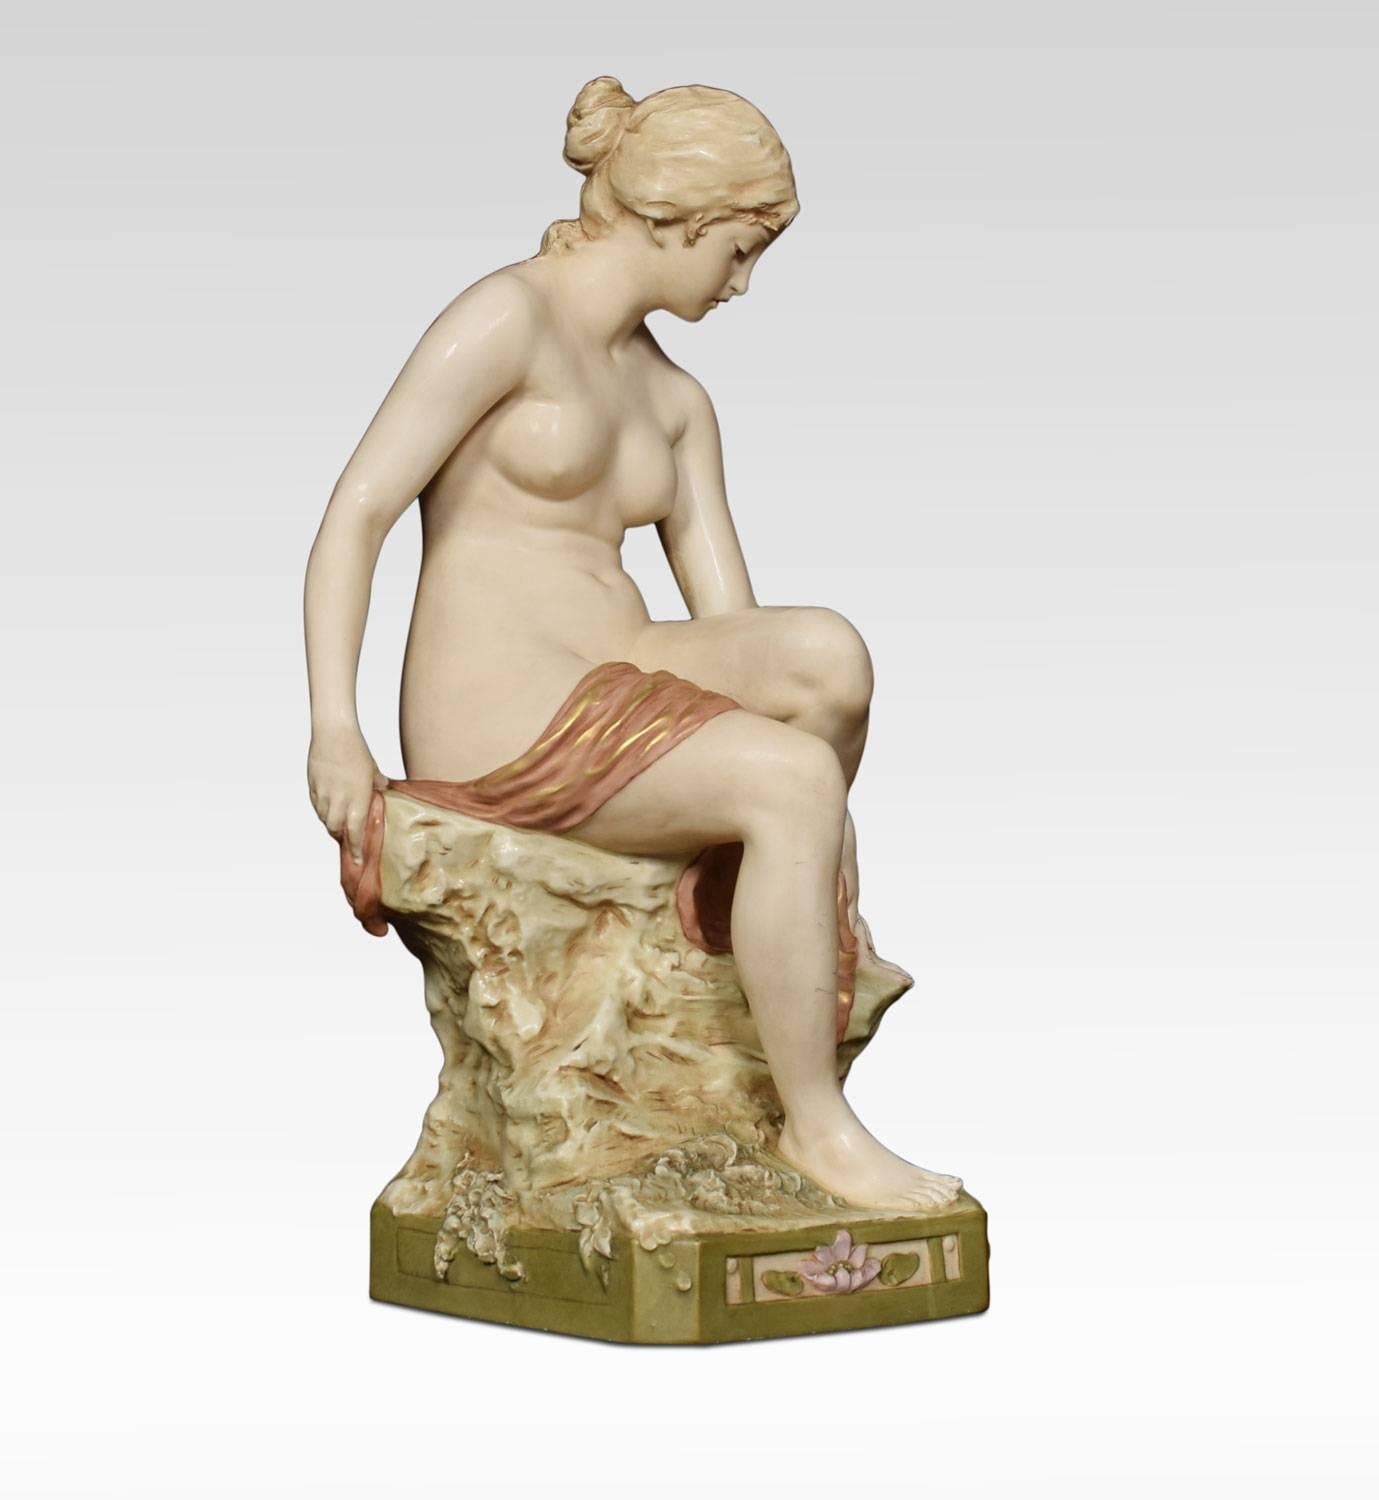 Royal Dux bohemia porcelain figure of a bather modelled seated on a rock with a towel drying her foot on canted square base, applied pink triangle.
Dimensions
Height 19 inches
Width 9.5 inches
Depth 8 inches.